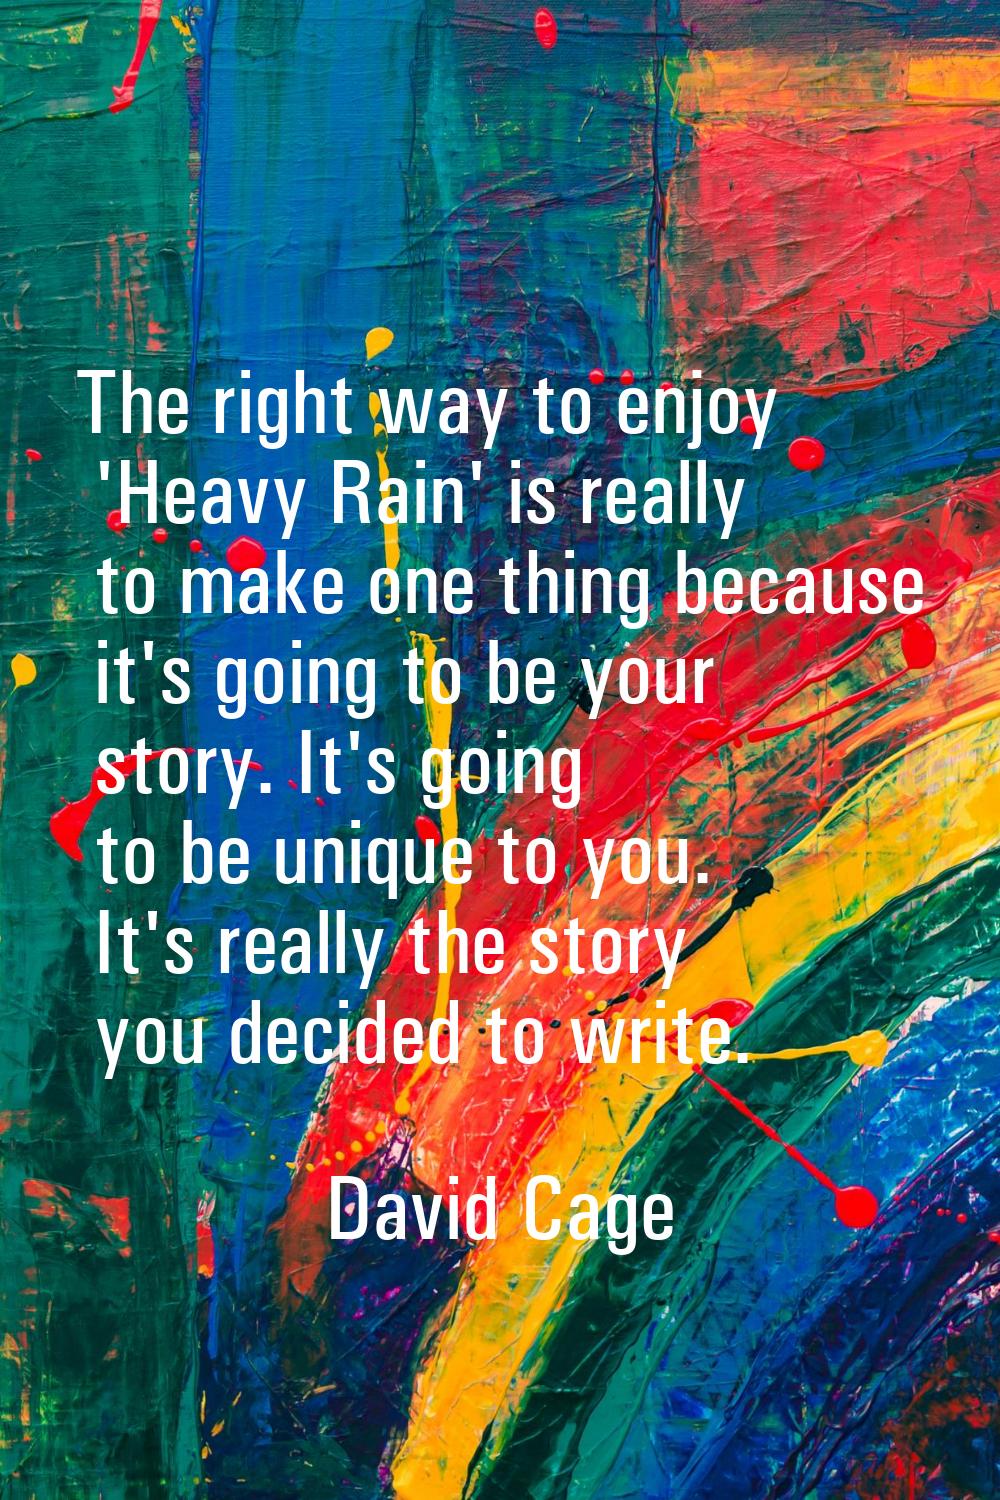 The right way to enjoy 'Heavy Rain' is really to make one thing because it's going to be your story